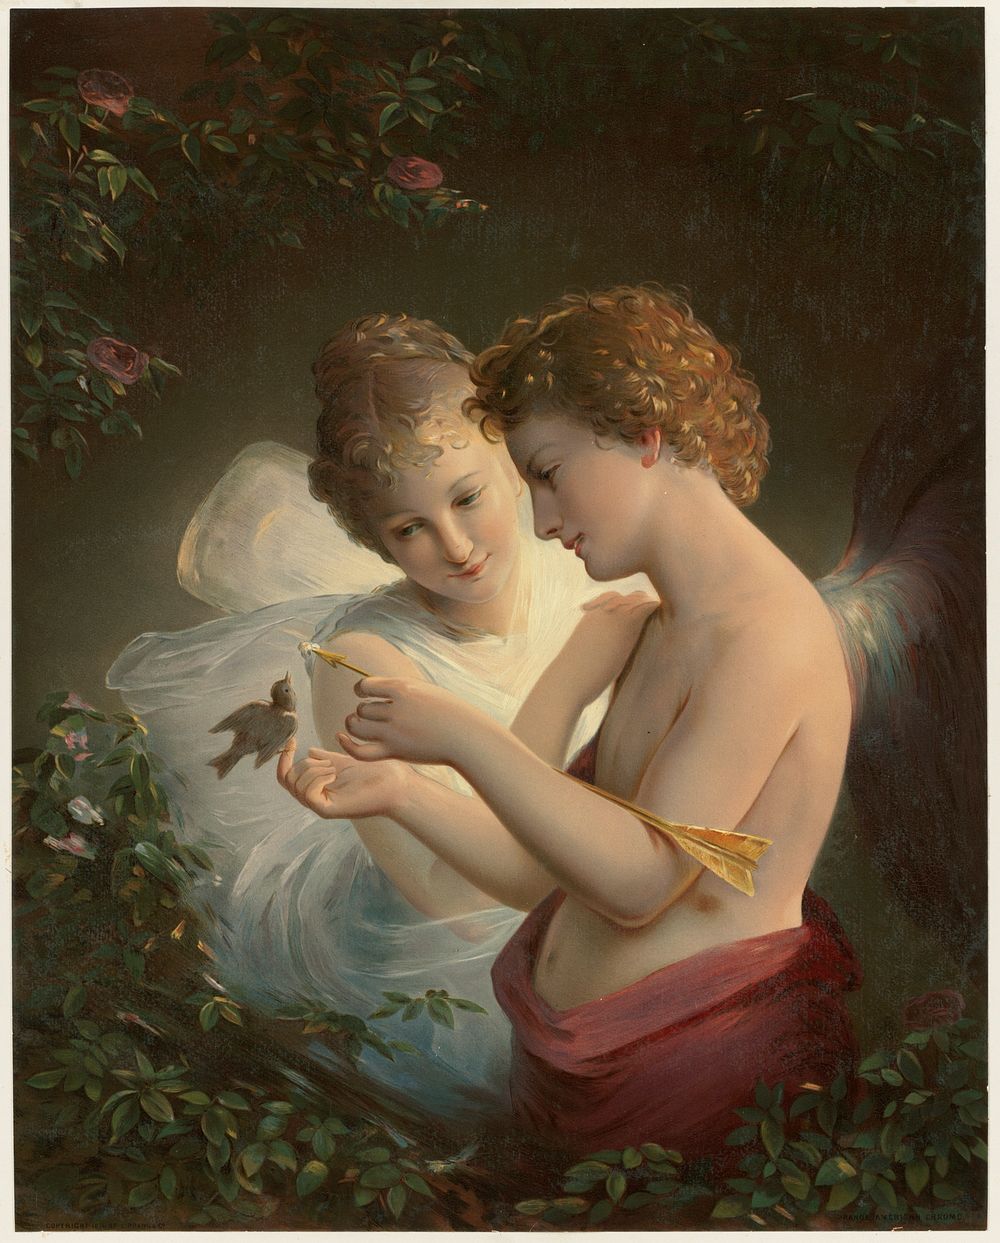             Cupid and Psyche          